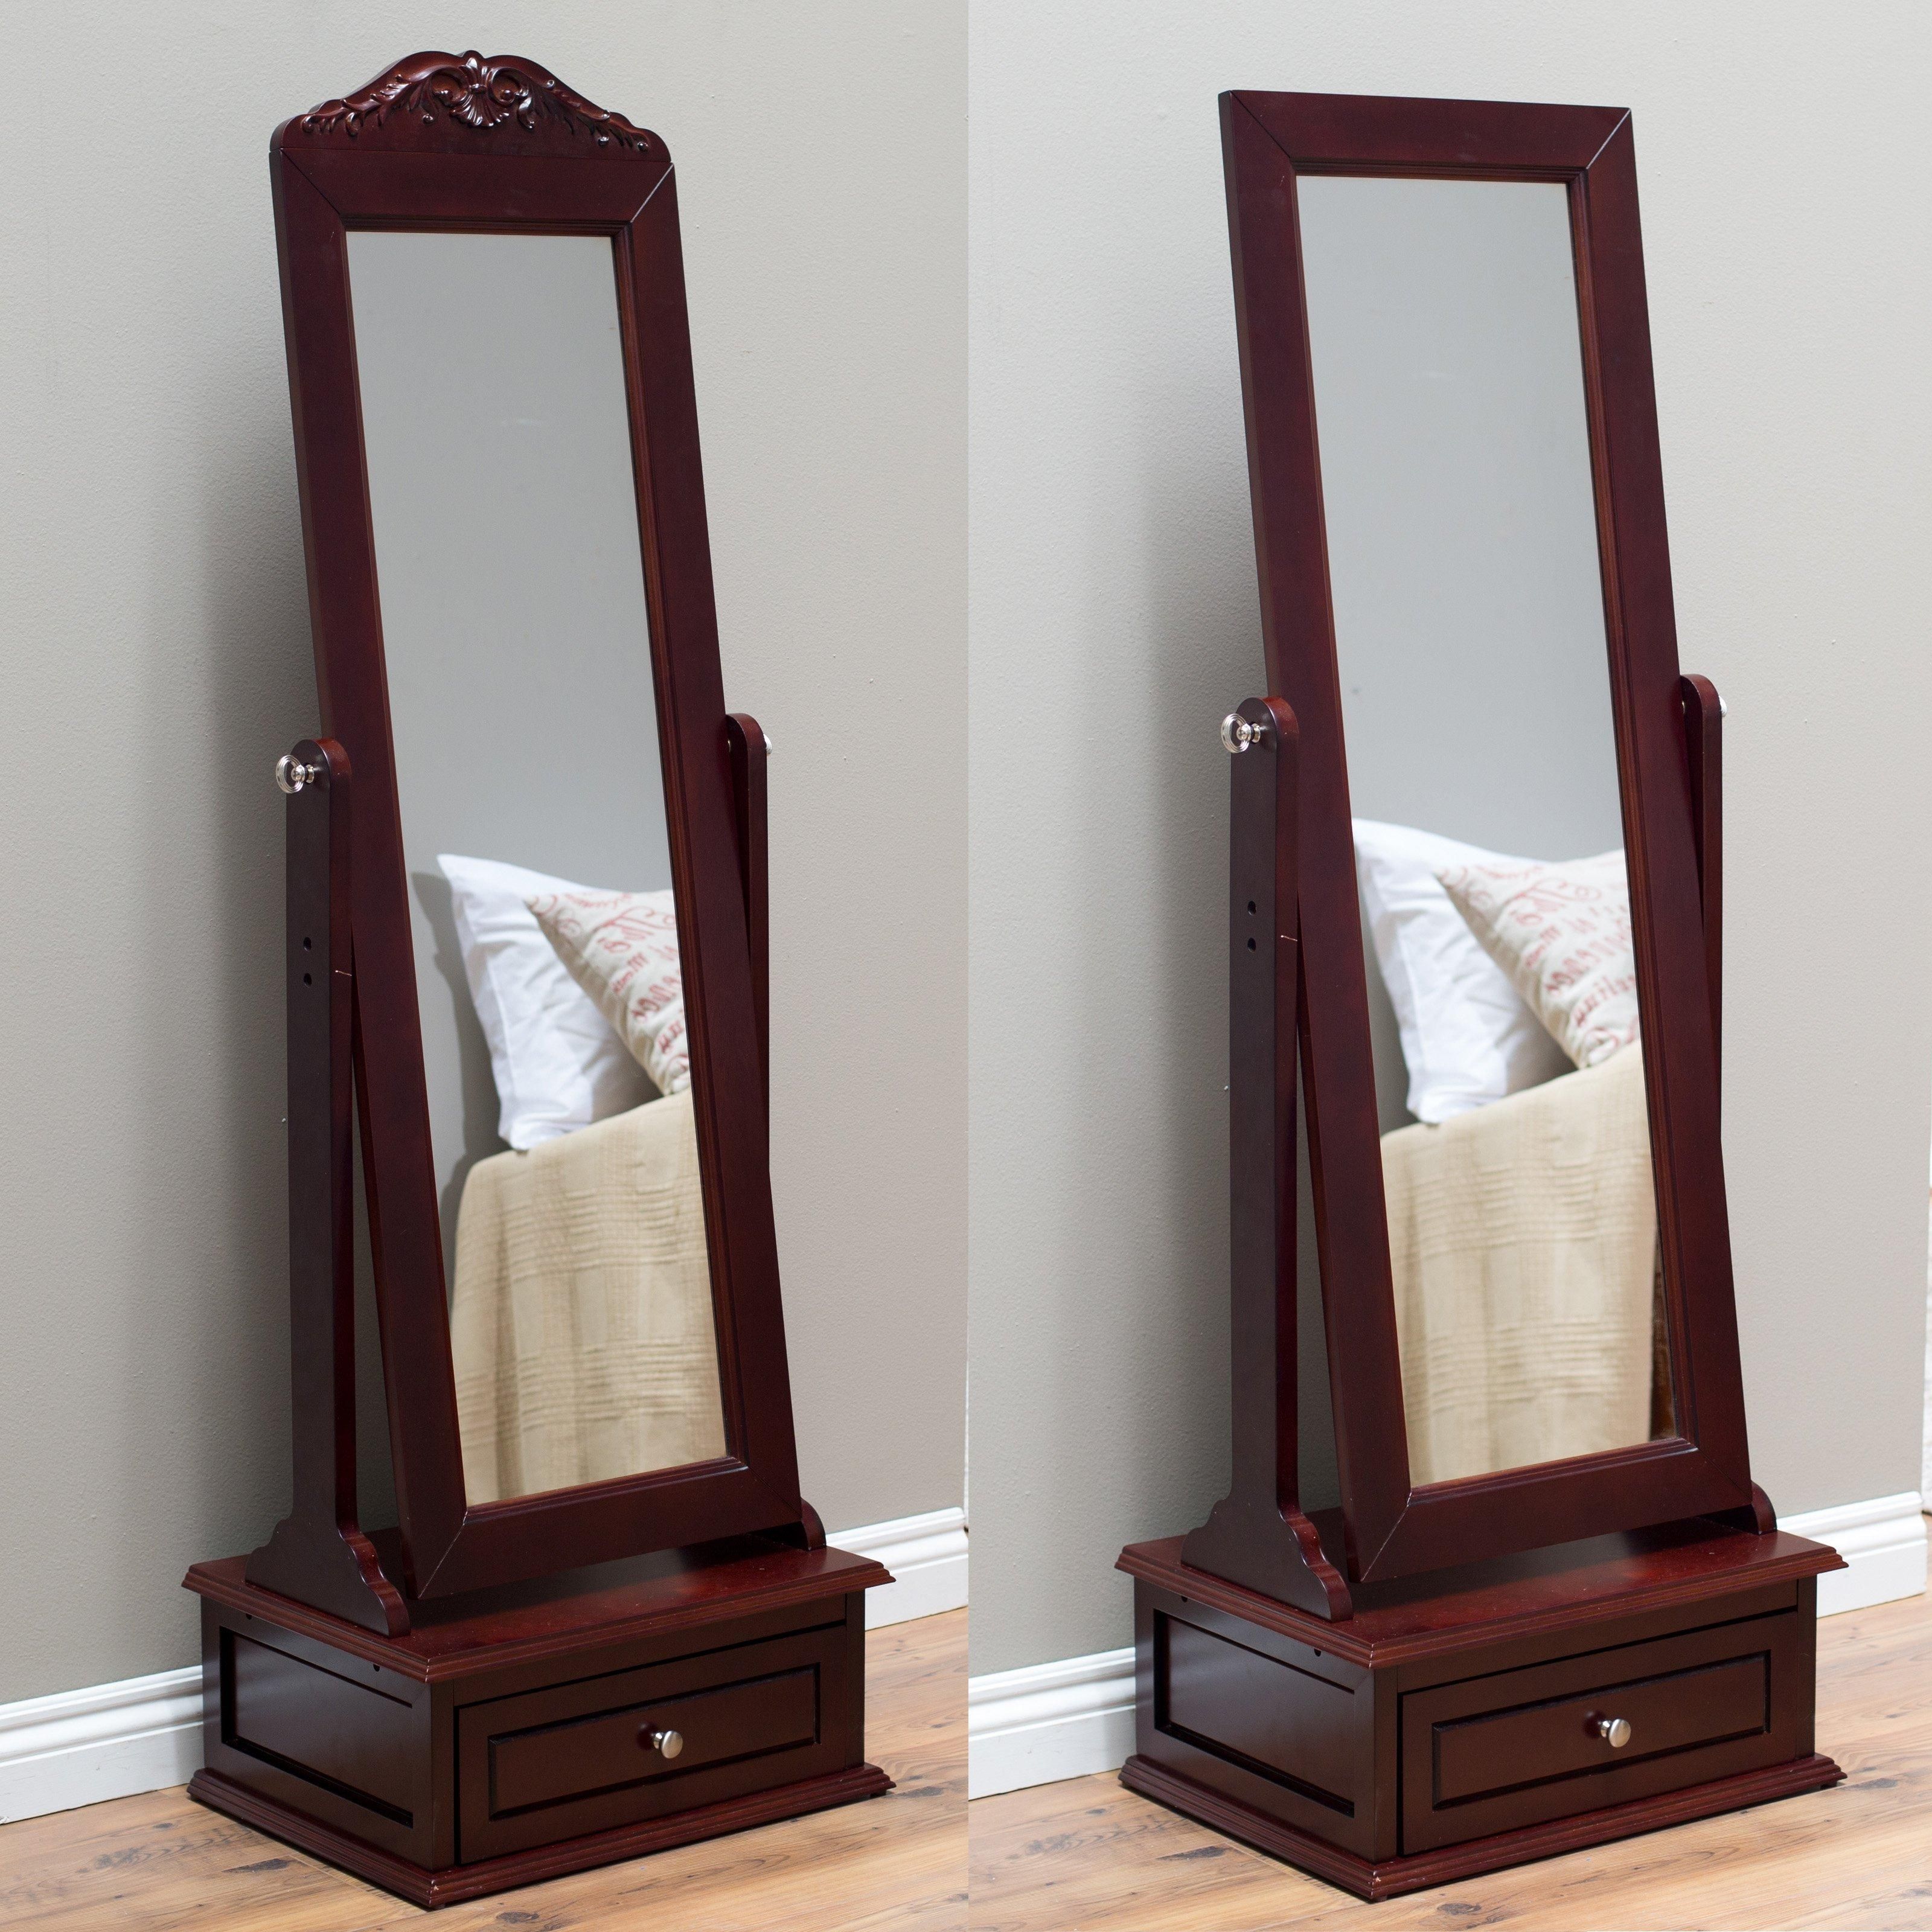 Furniture: Cheval Mirror | Cherry Full Length Mirror | Cheap In Cheap Stand Up Mirrors (View 19 of 20)